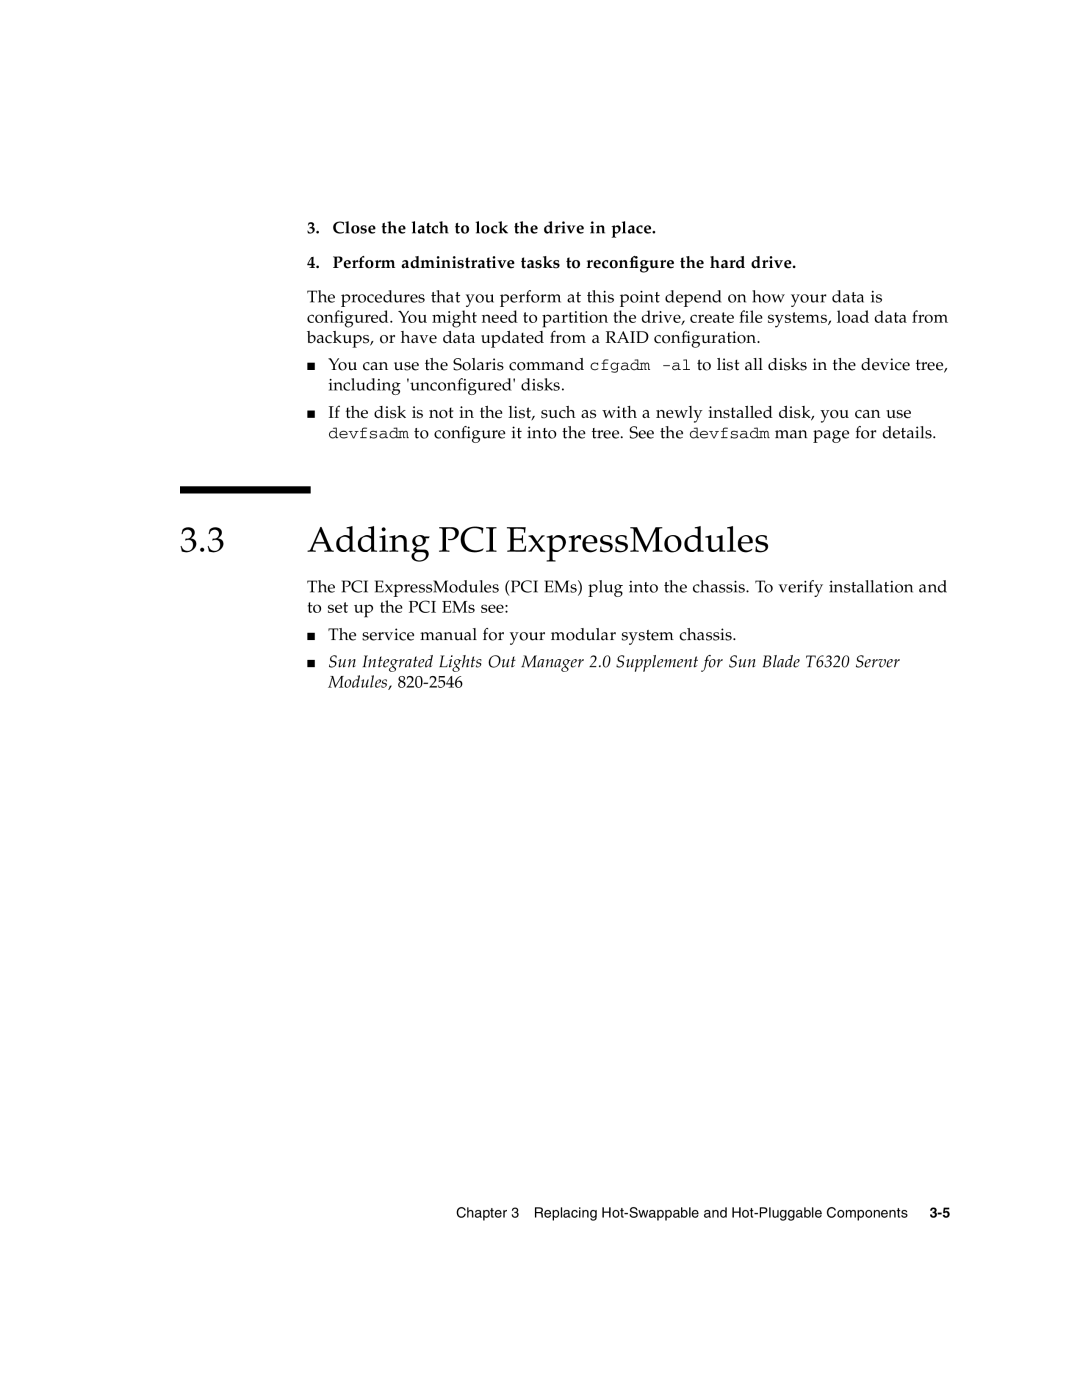 Sun Microsystems T6320 service manual Adding PCI ExpressModules, Close the latch to lock the drive in place 